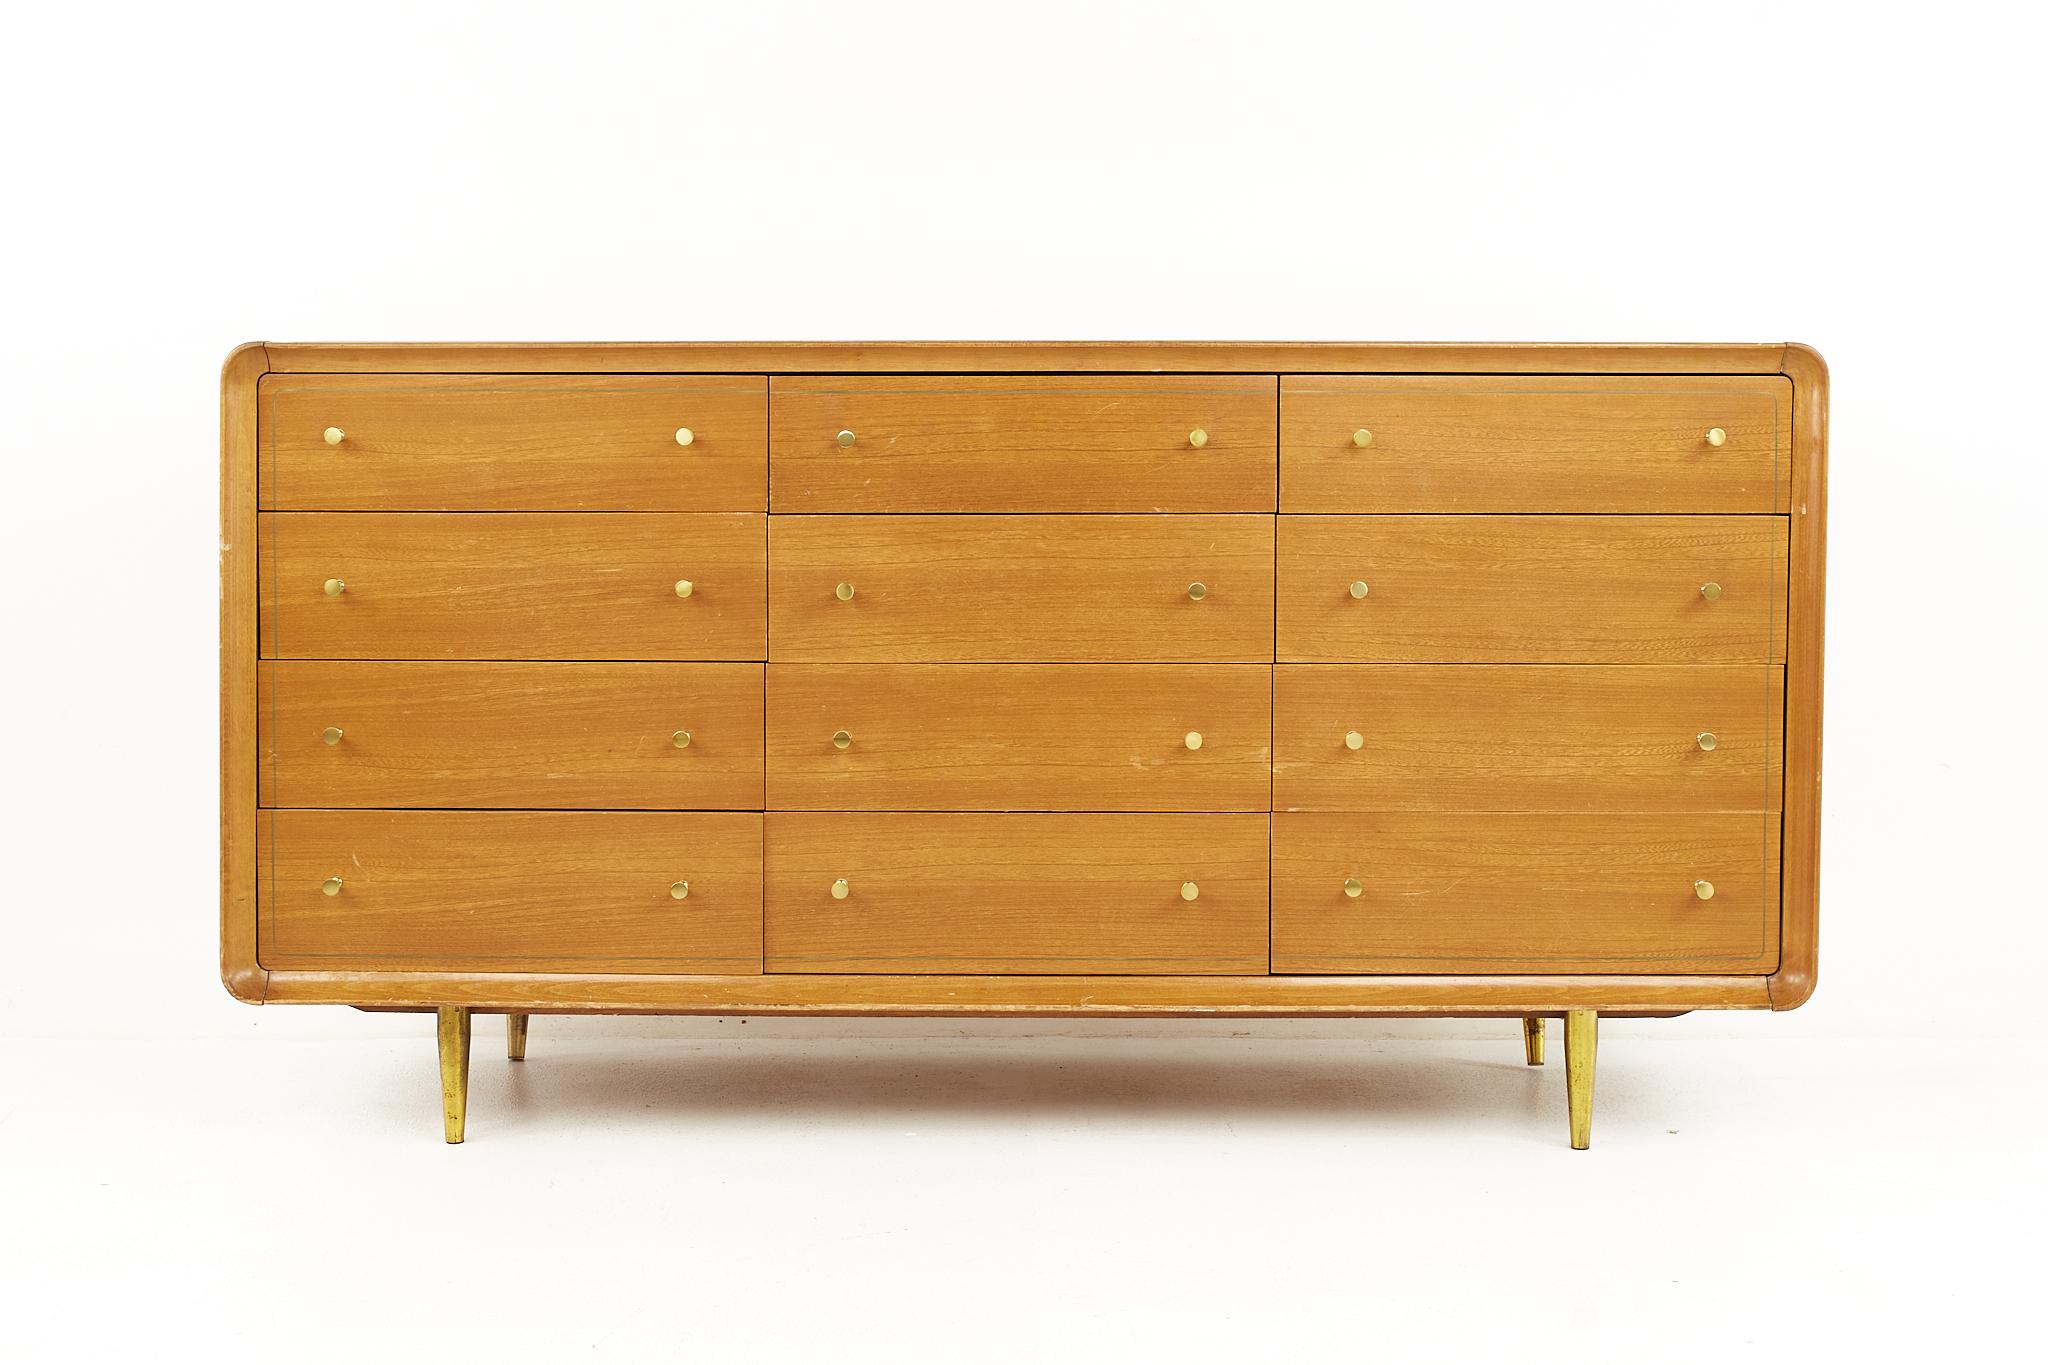 Cavalier mid century walnut and brass 12 drawer lowboy dresser.

The dresser measures: 64 wide x 20 deep x 33.25 inches high.

All pieces of furniture can be had in what we call restored vintage condition. That means the piece is restored upon